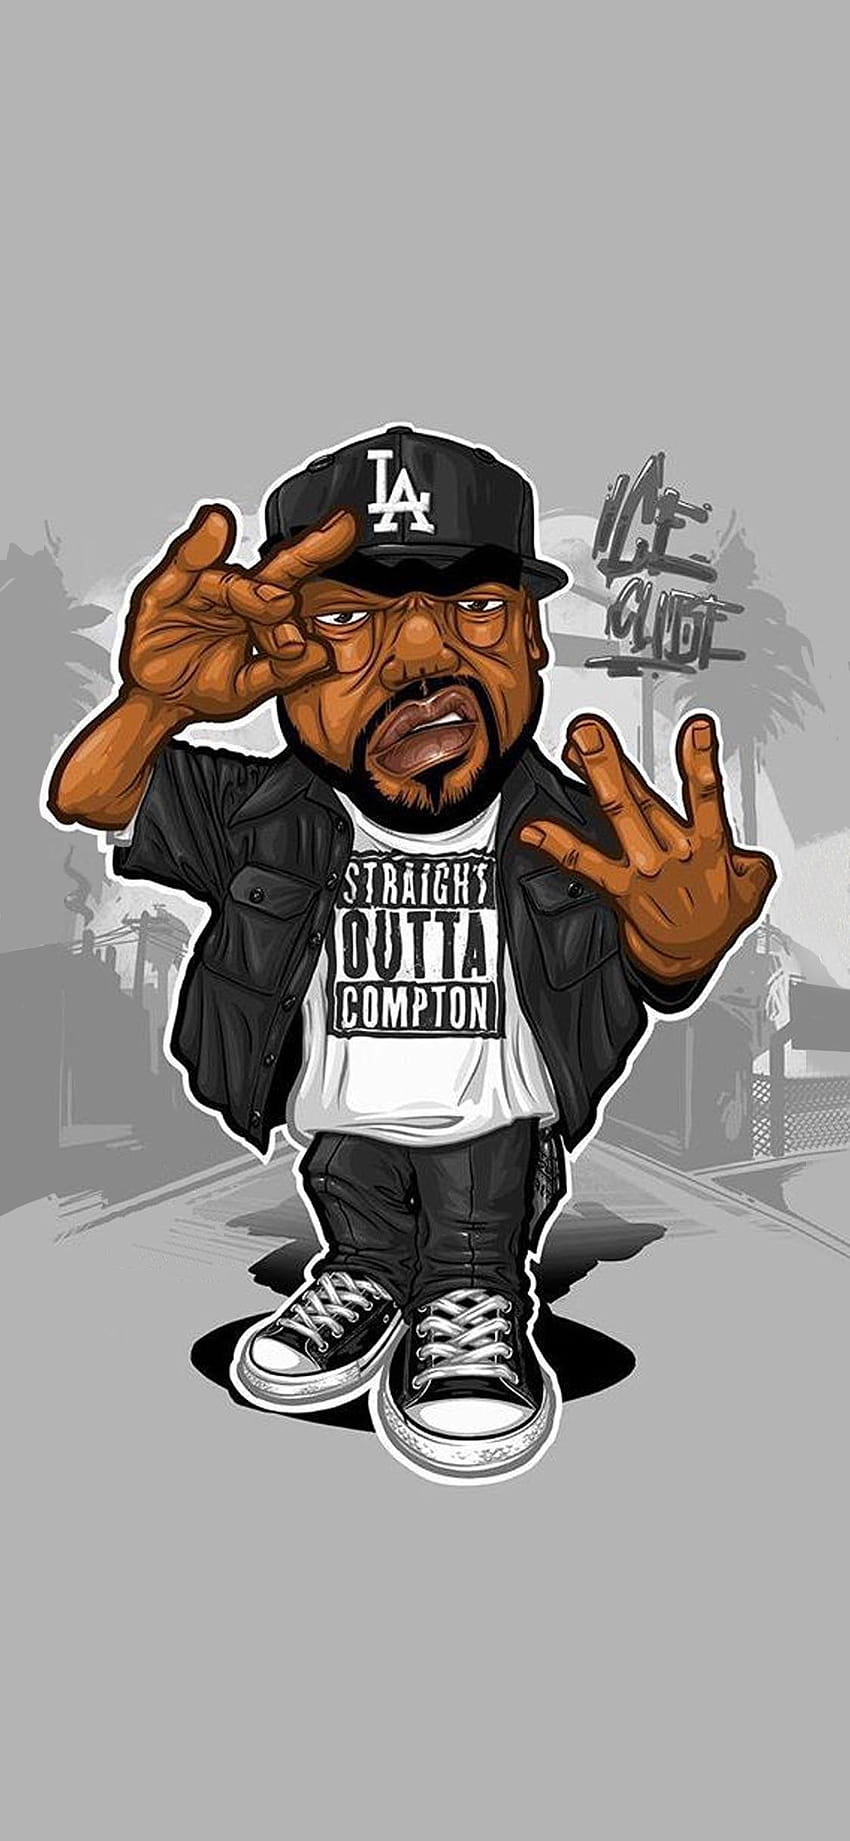 Ice Cube Art, Cropped, Chopped And Edited For The iPhone Xs Max, iphone hip hop artist cartoon HD phone wallpaper